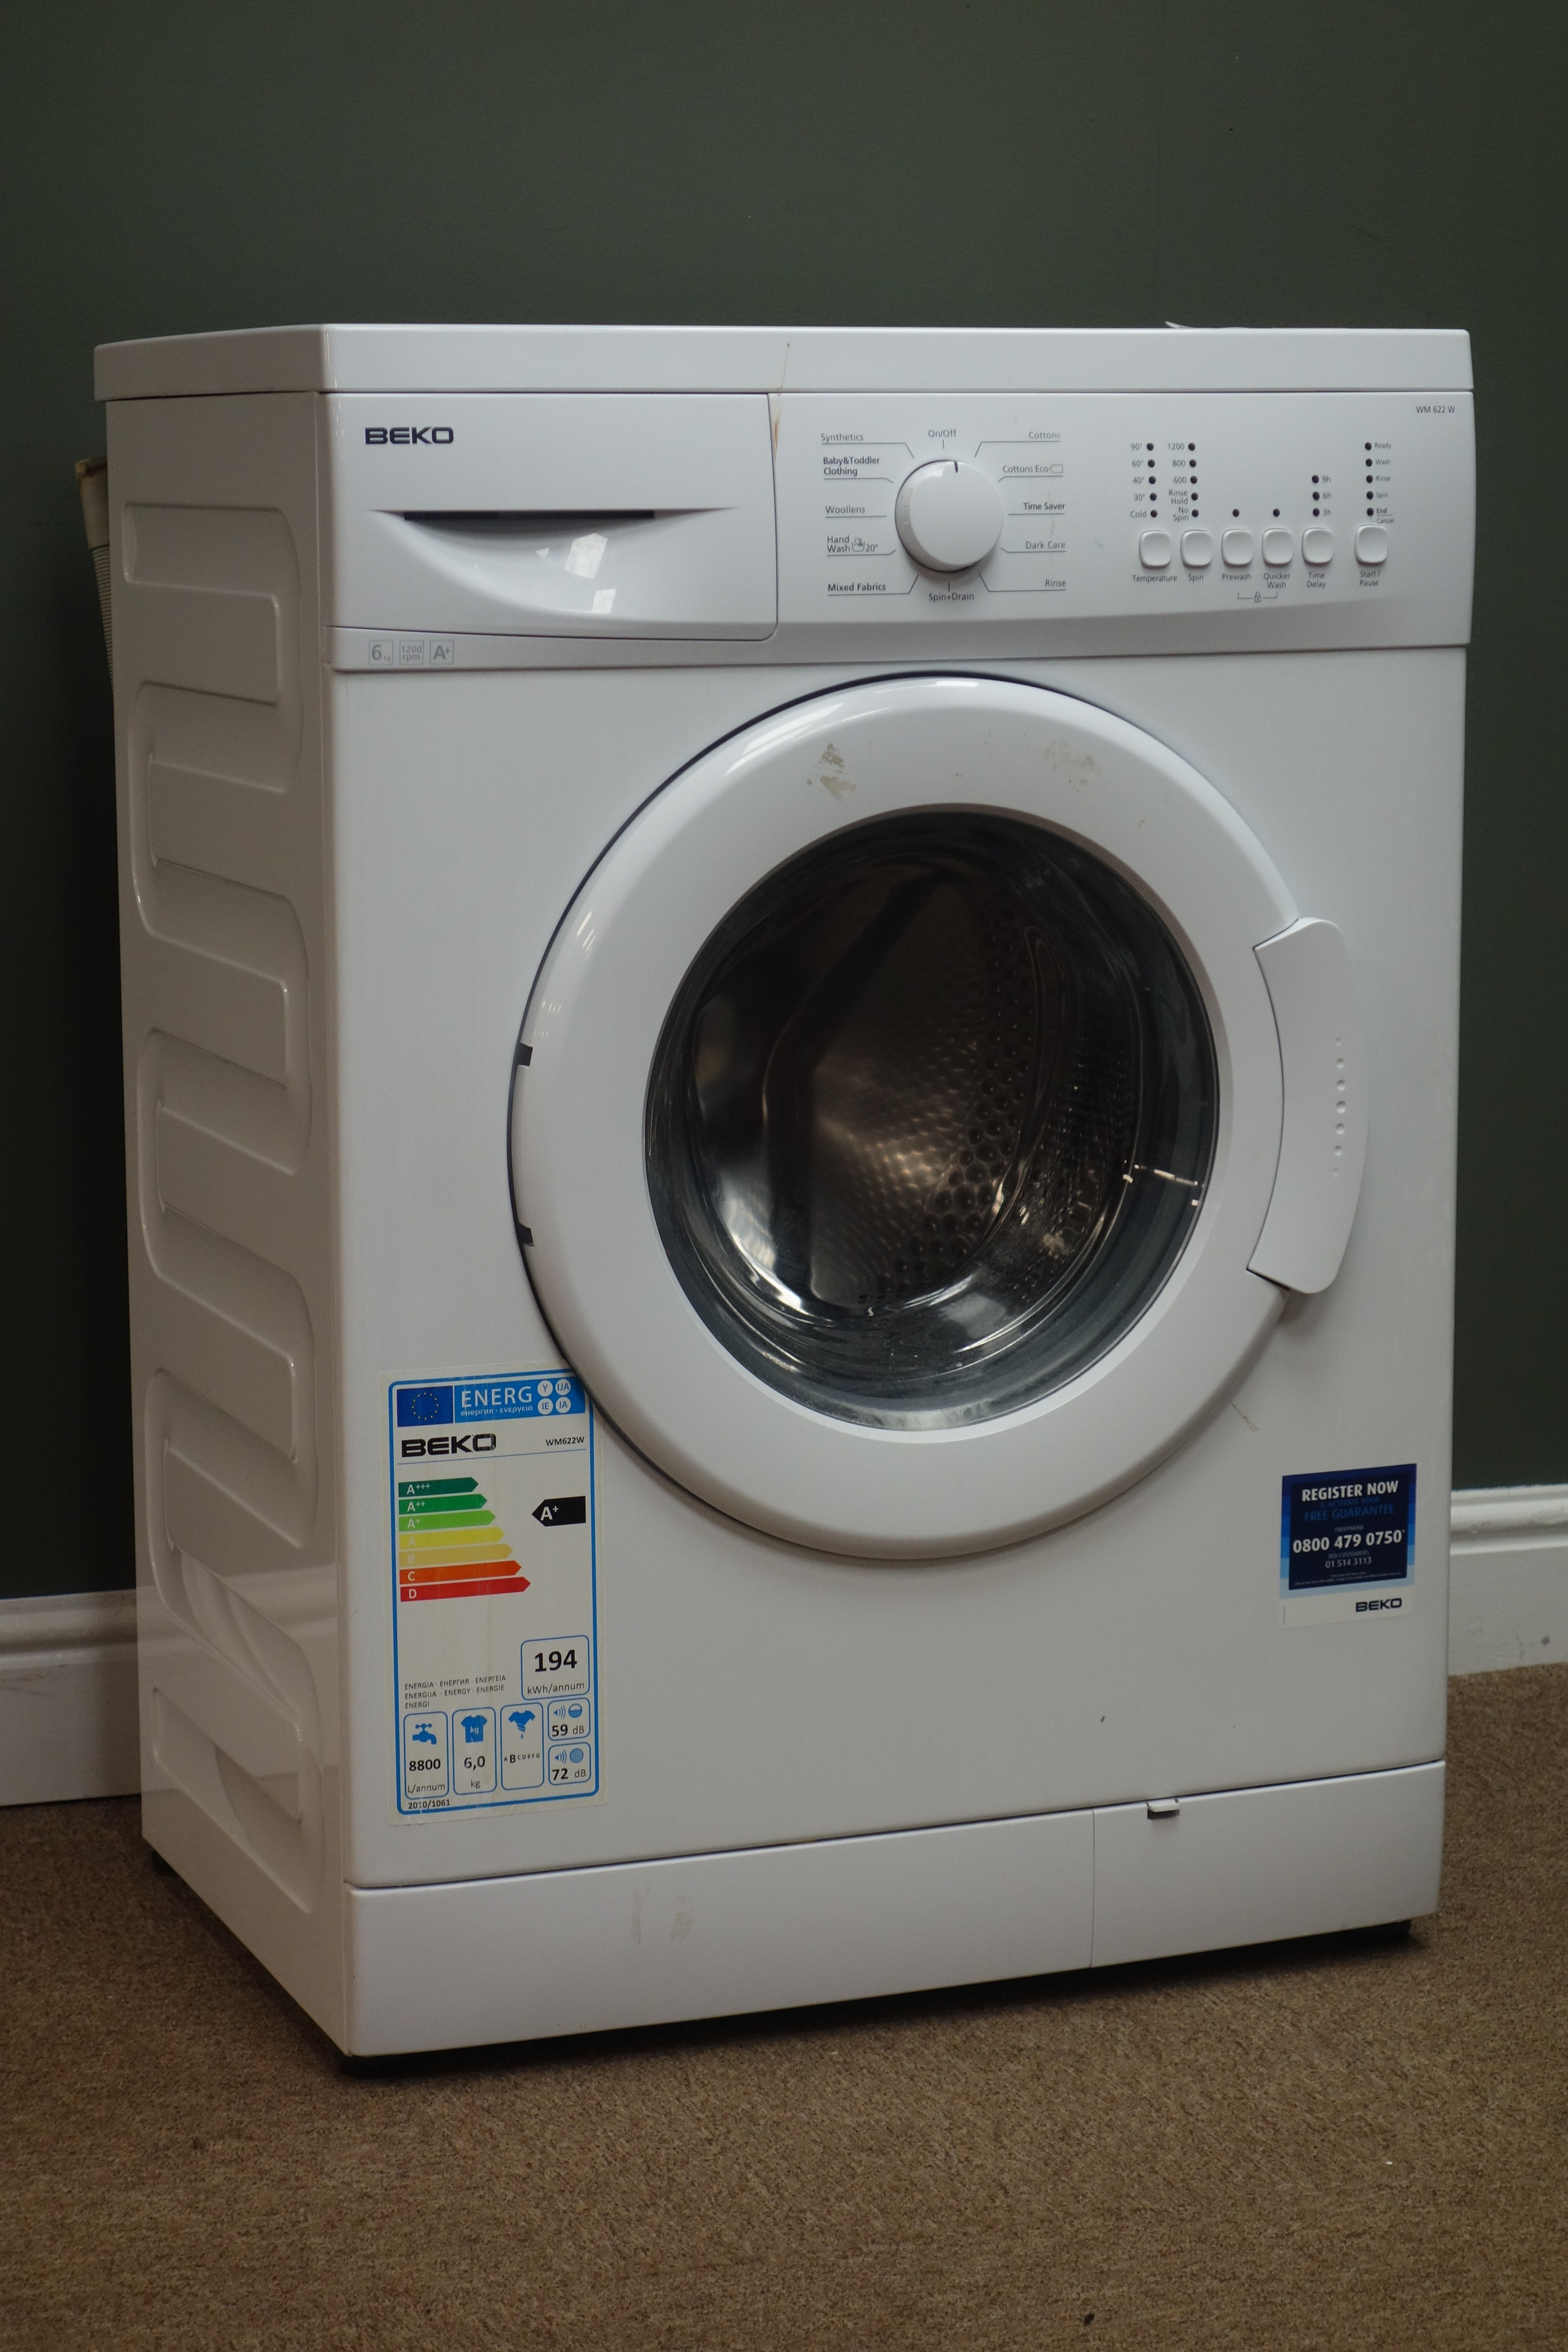 BEKO WM622W washing machine (This item is PAT tested - 5 day warranty from date of sale)